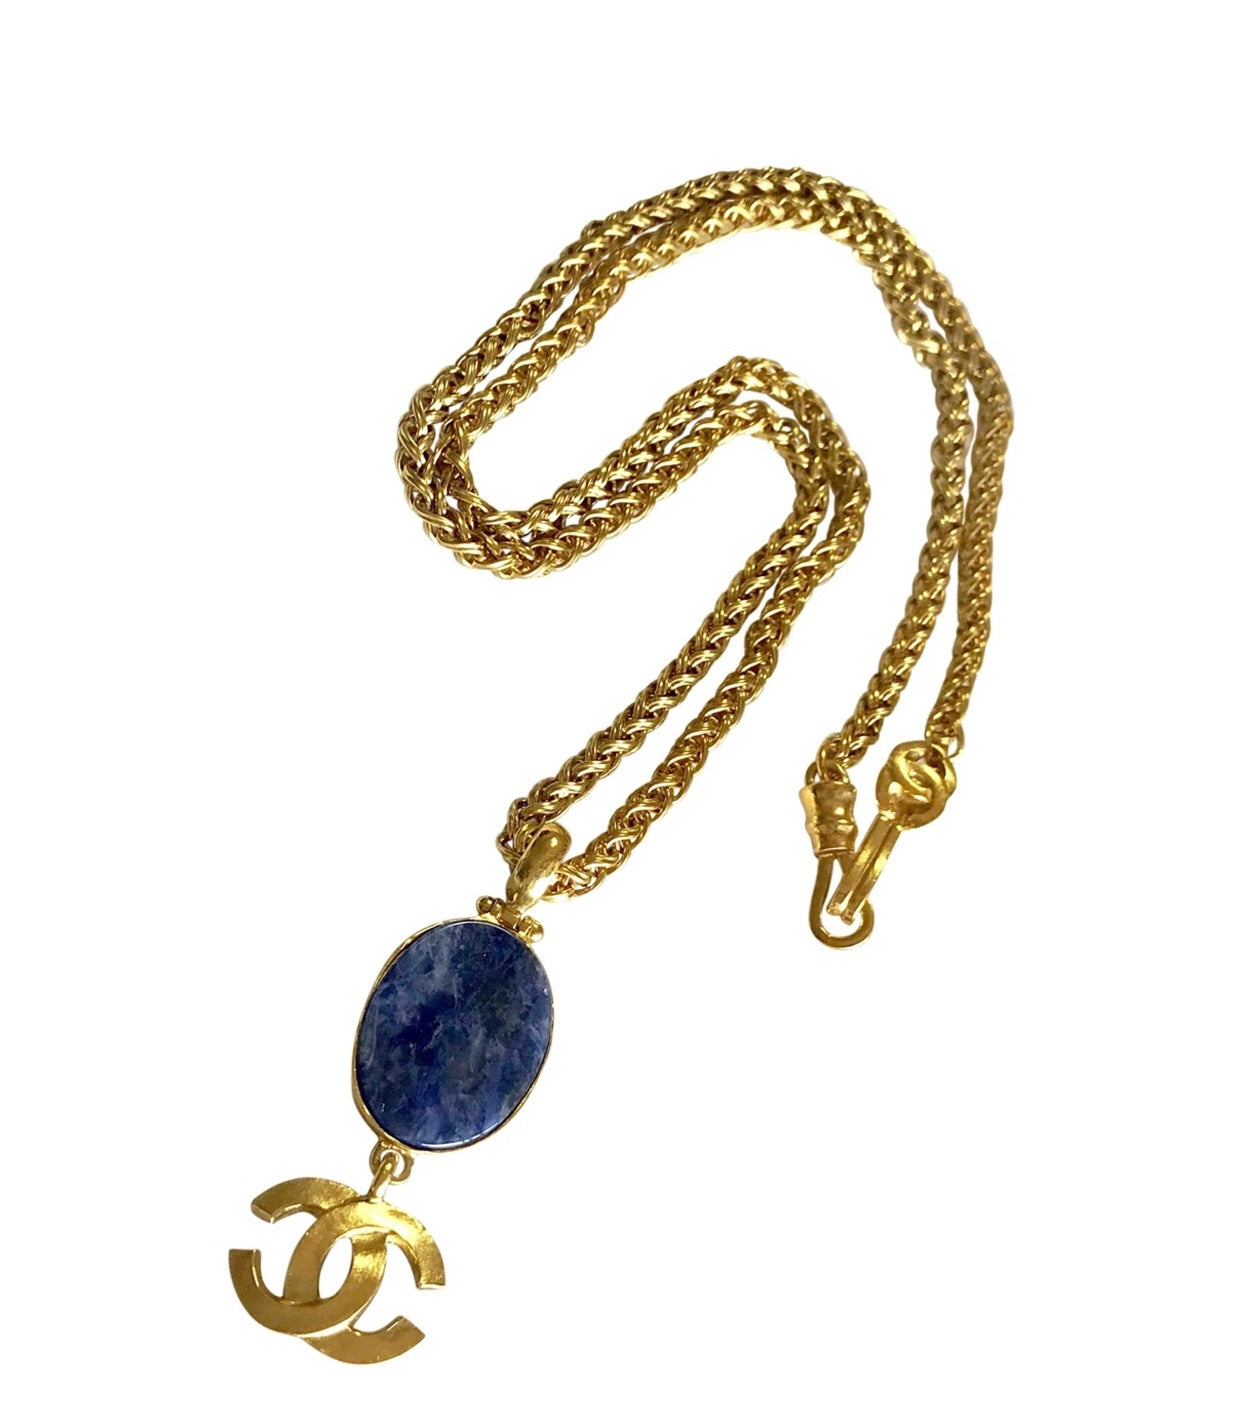 NEW CHANEL NECKLACE LOGO CC & PEARLS NECKLACE 105CM IN GOLD METAL NECKLACE  Golden ref.513783 - Joli Closet